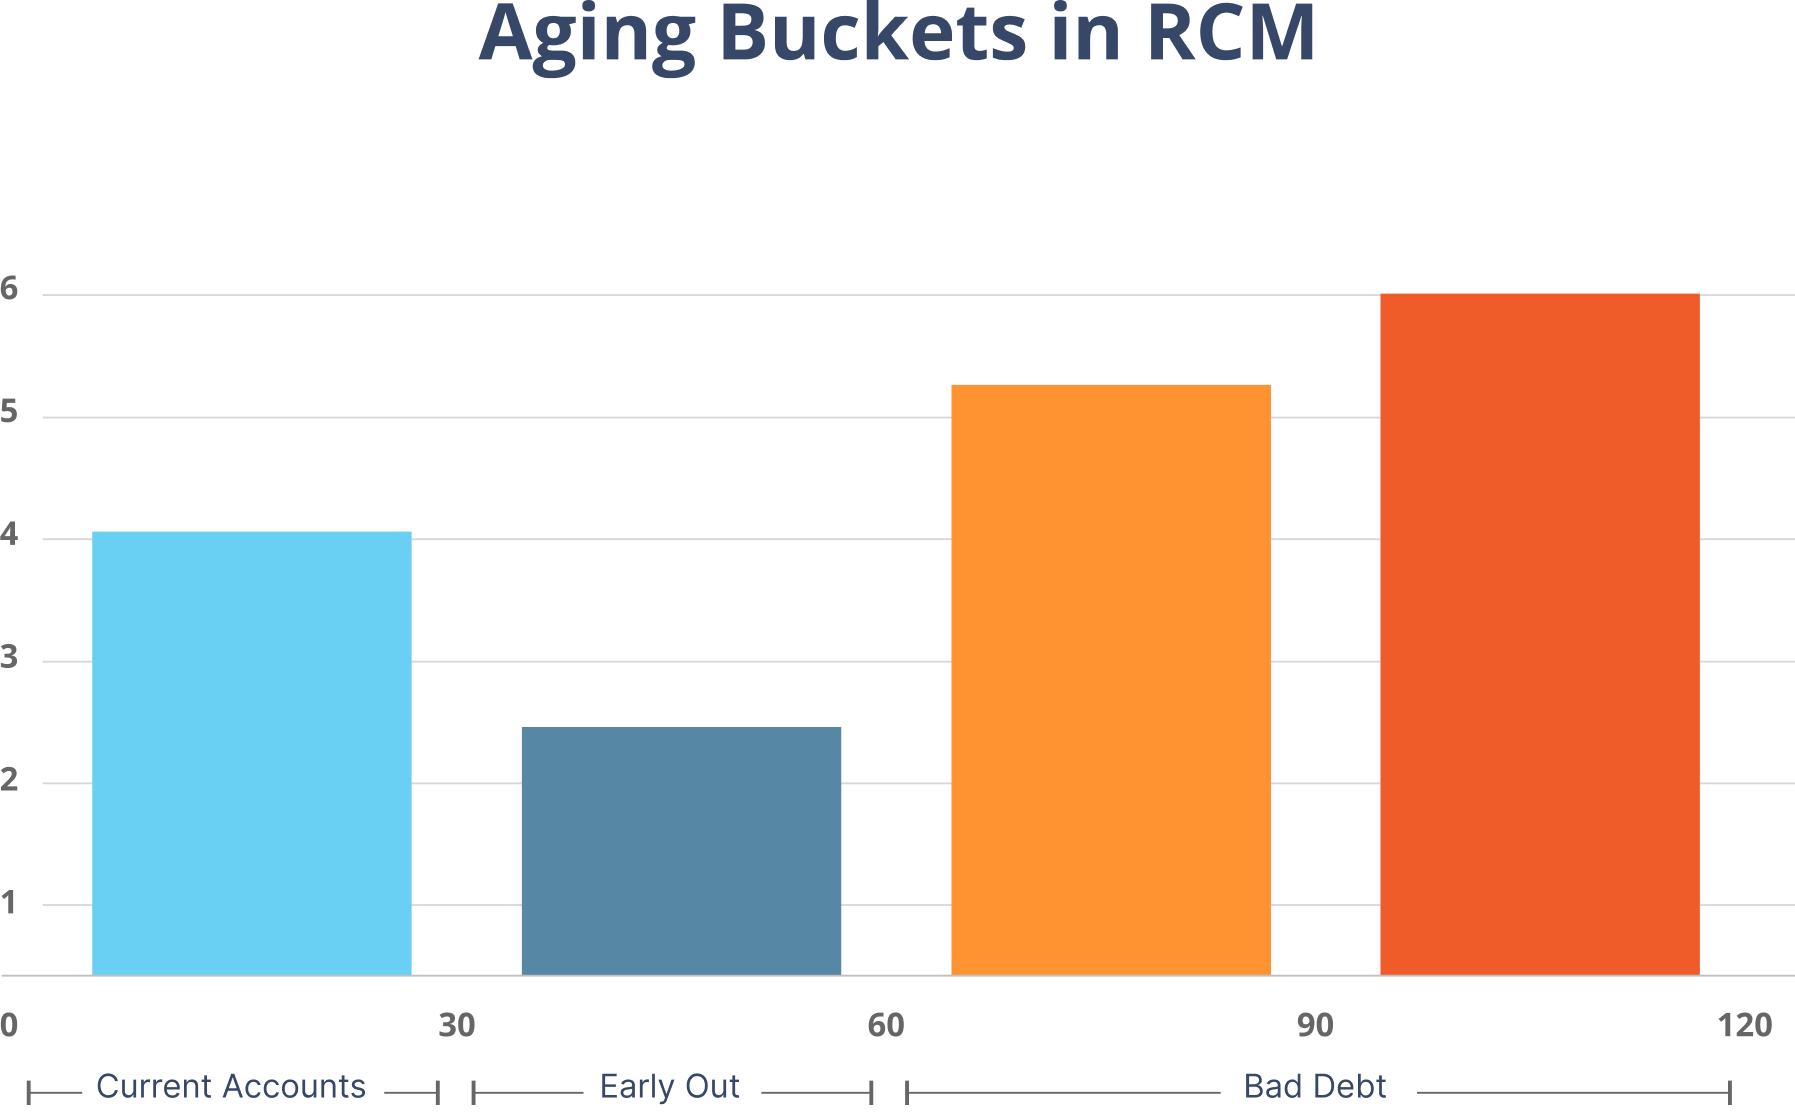 bar chart about aging buckets in RCM